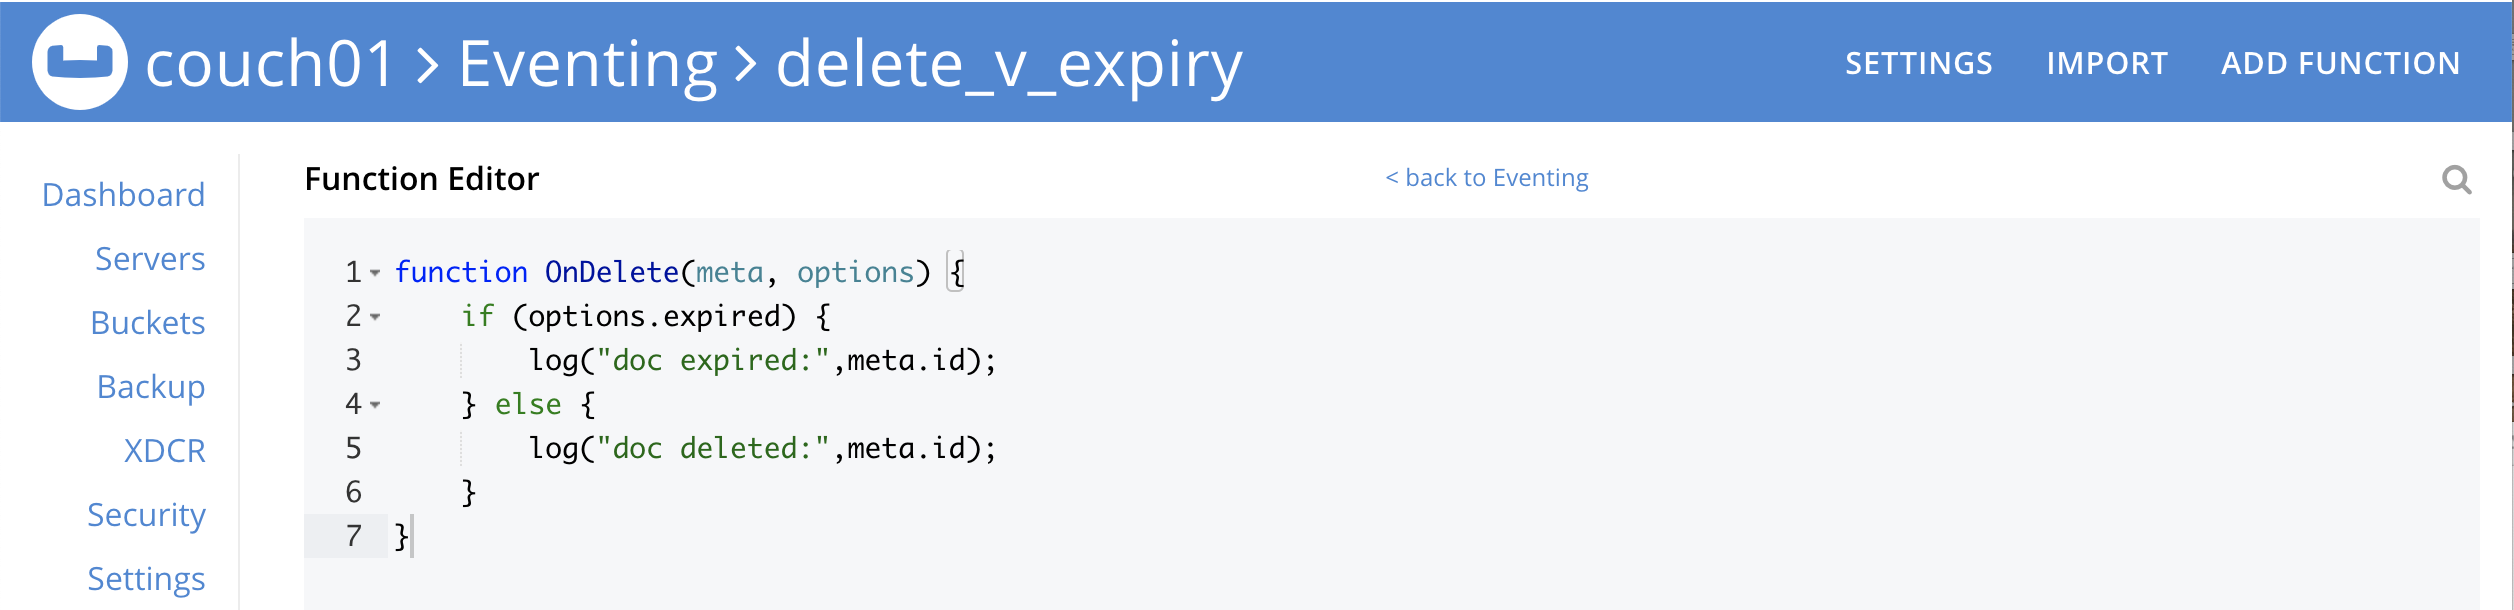 del v expiry 03 editor with code